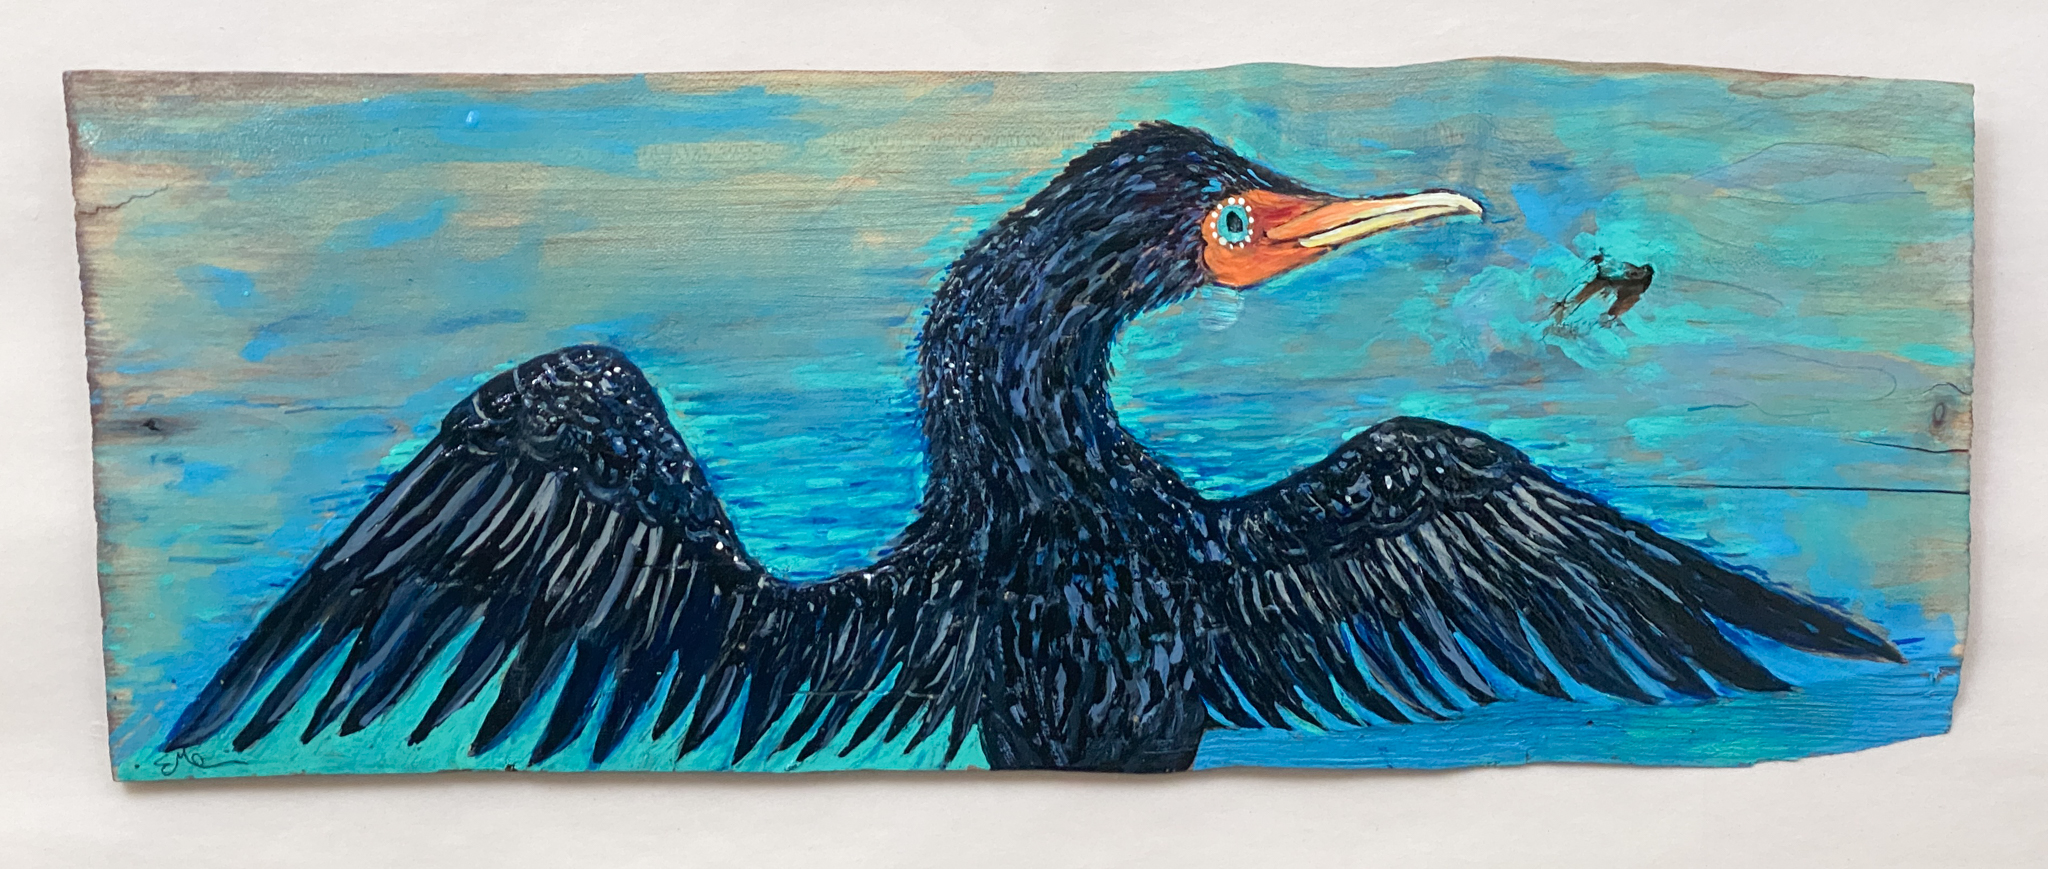 Cormorant Drying Its Wings — This is one of my favourites and we’ve used it for our Scrape Facebook page. In the summer, seeing cormorants on the rocks just 10 or 20 metres from the shore, with their wings outstretched, it’s such a familiar sight. This is acrylic on sawn boards from firewood.